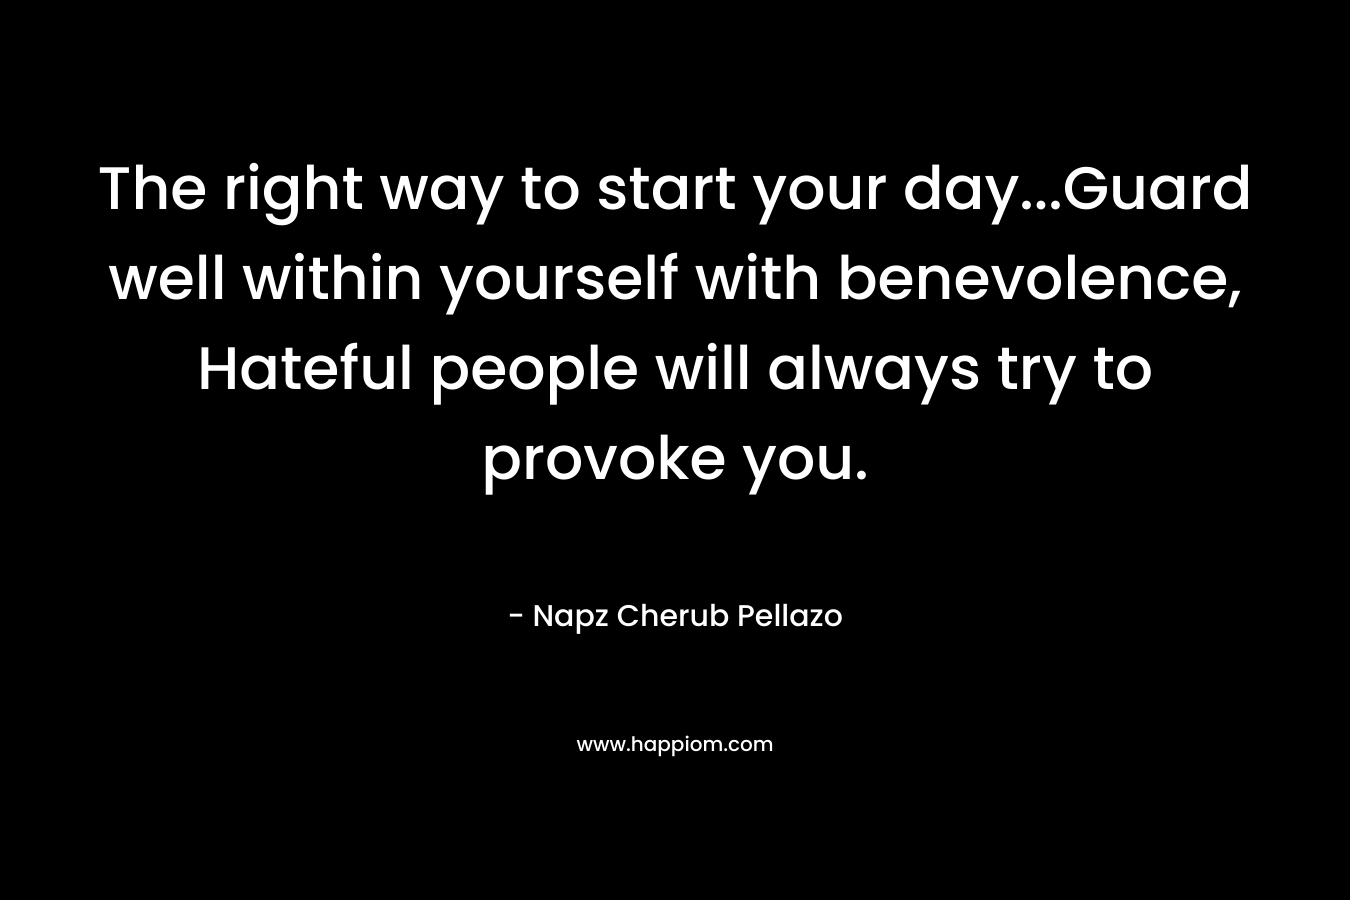 The right way to start your day…Guard well within yourself with benevolence, Hateful people will always try to provoke you. – Napz Cherub Pellazo